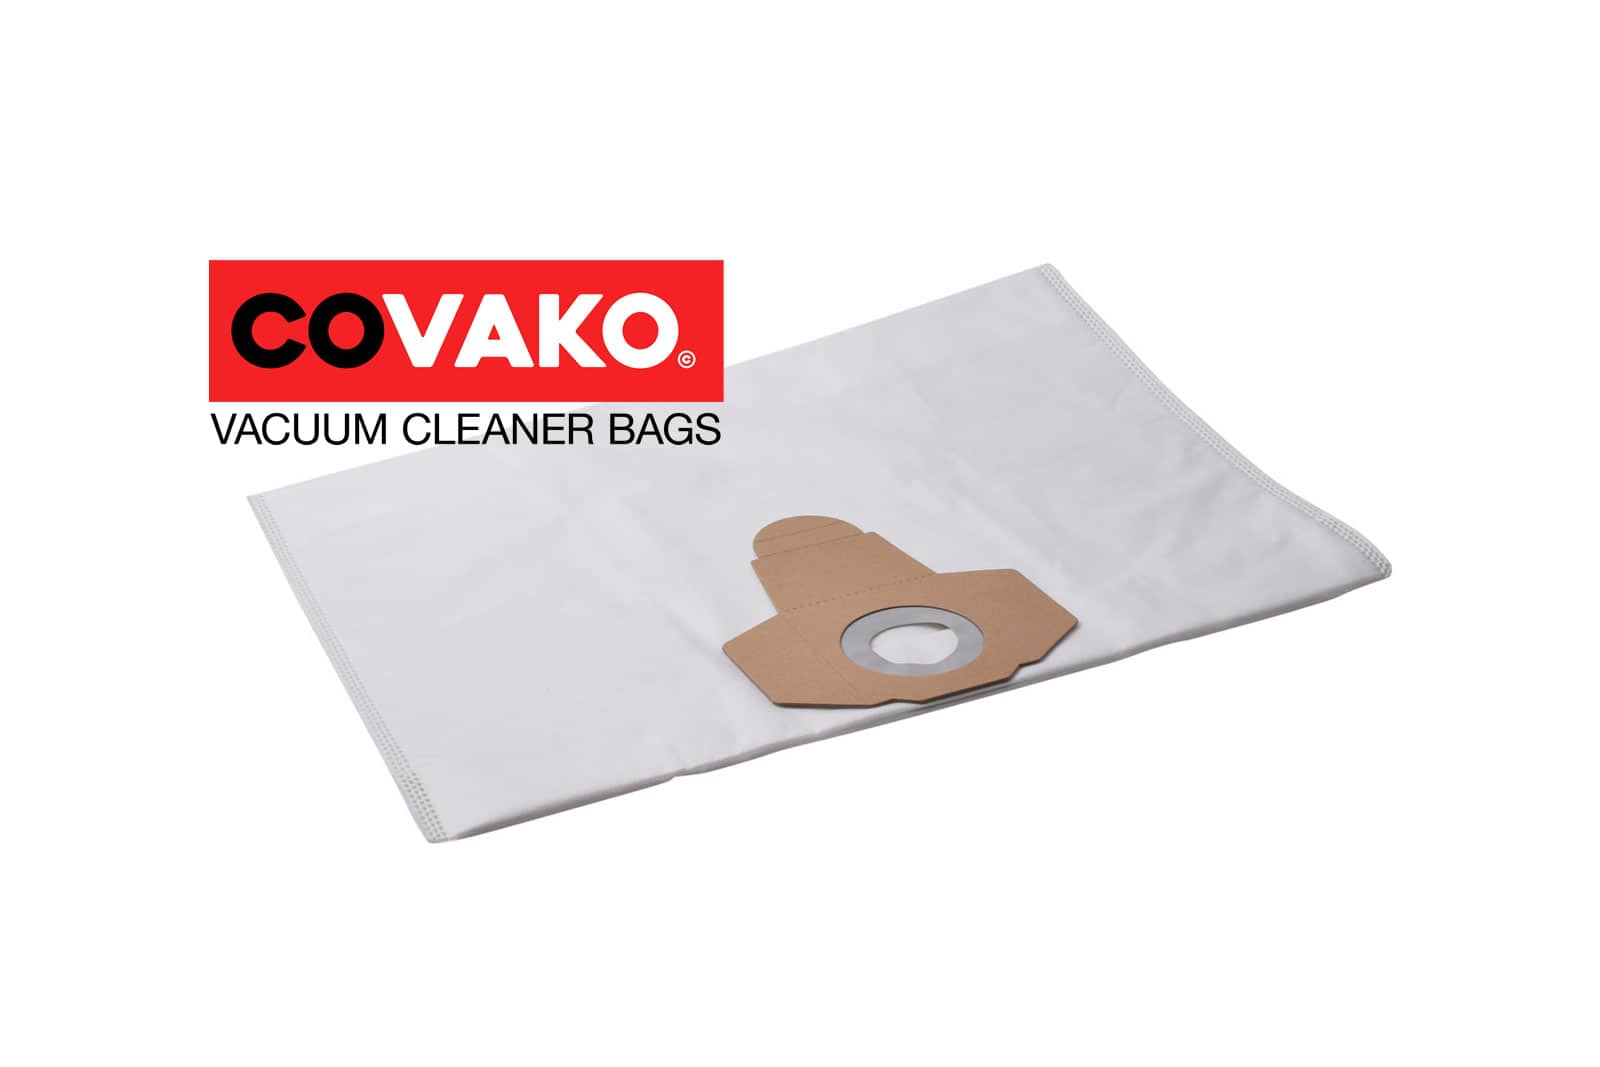 Einhell TC-VC 18/20 Li S-Solo / Synthesis - Einhell vacuum cleaner bags